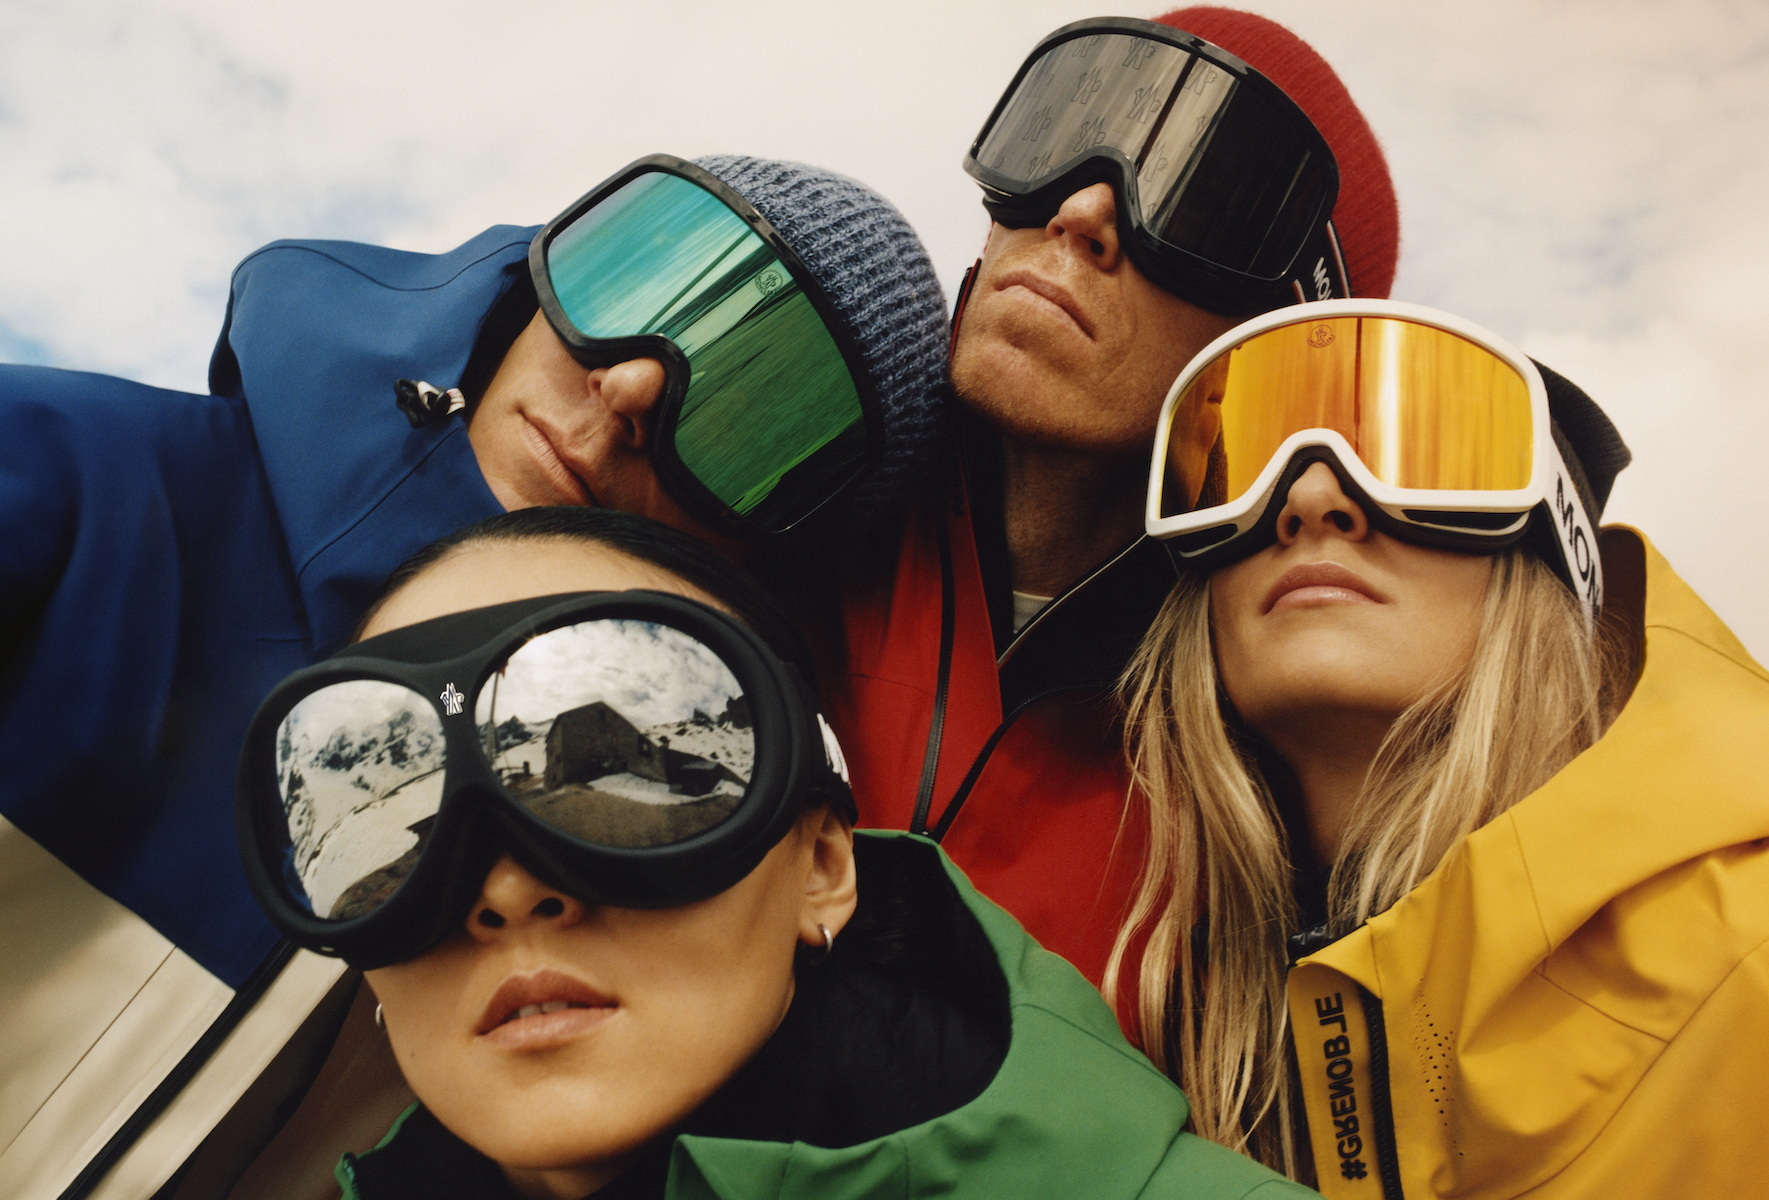 Skiwear to hit the slopes in style in winter 2023